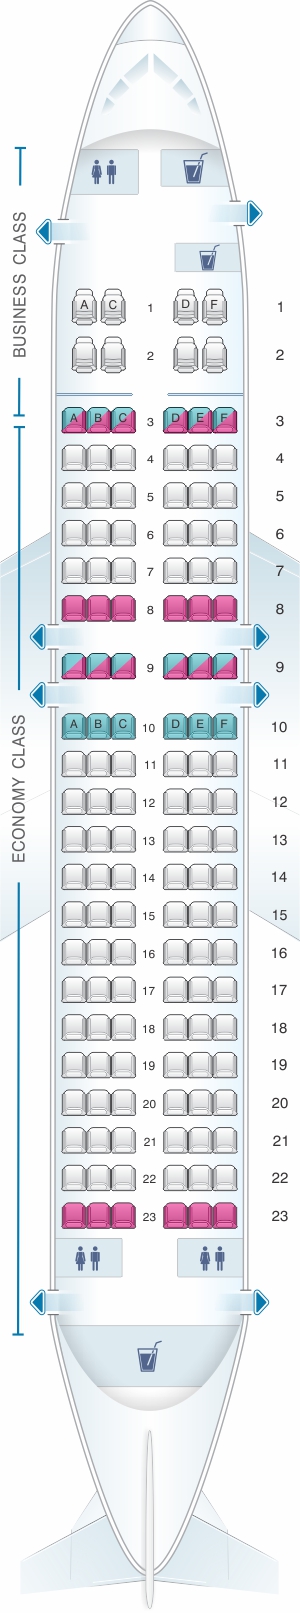 Seat map for SpiceJet Boeing B737 700